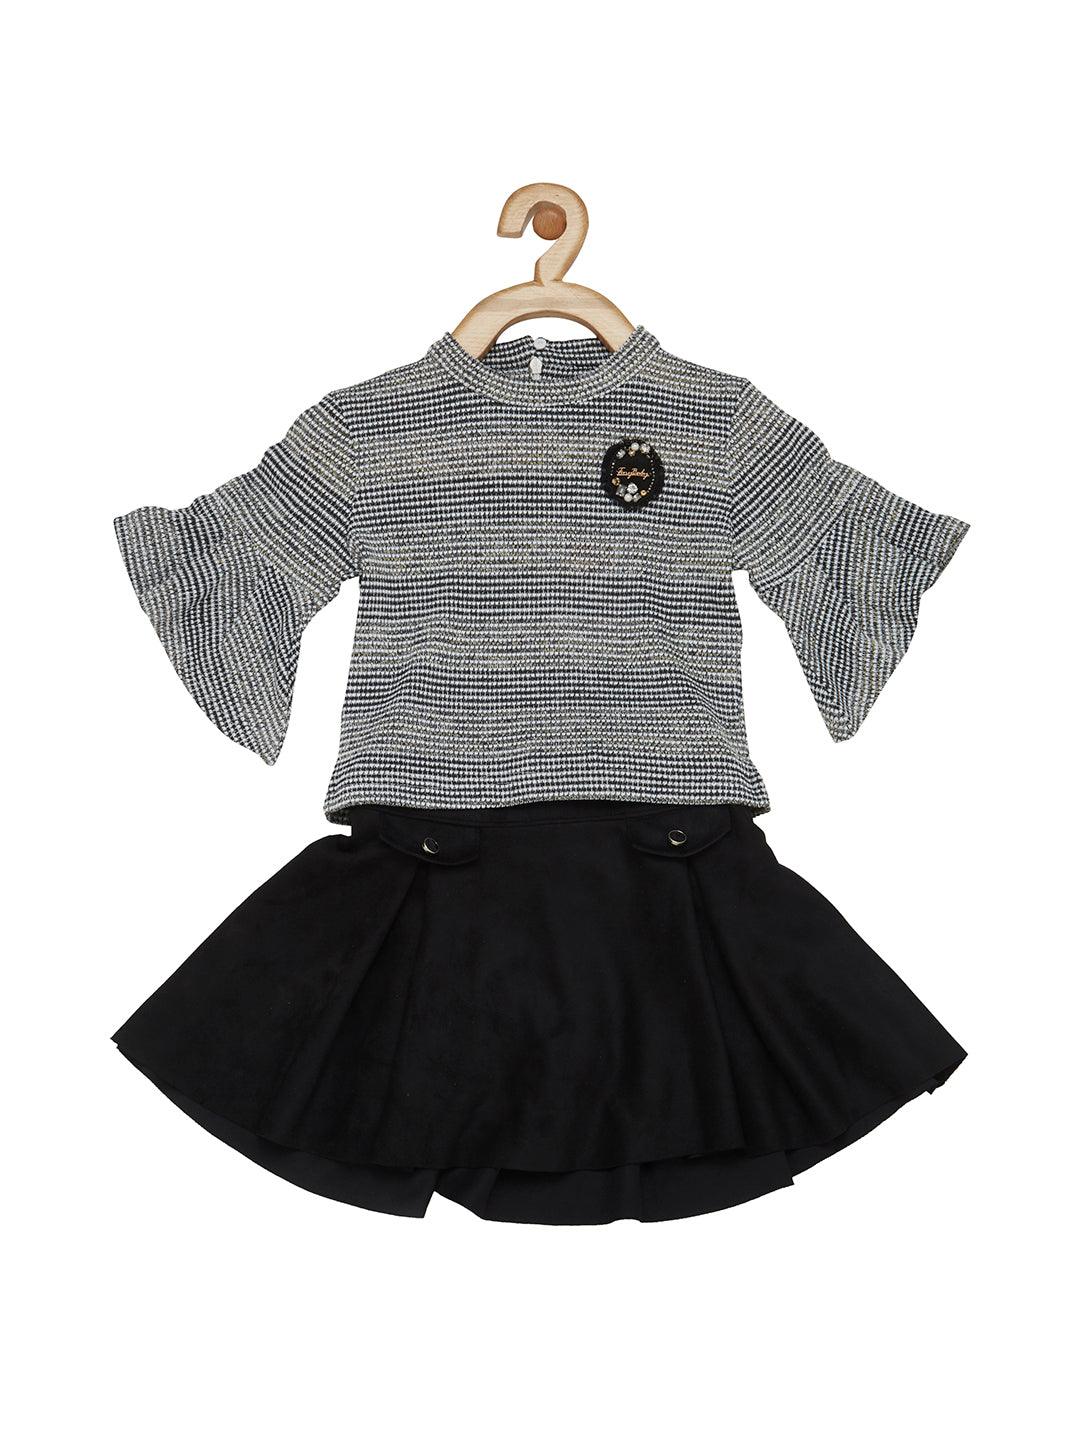 Black Coloured Skirt Top Set - 1787 Black - TINY BABY INDIA shop.tinybaby.in